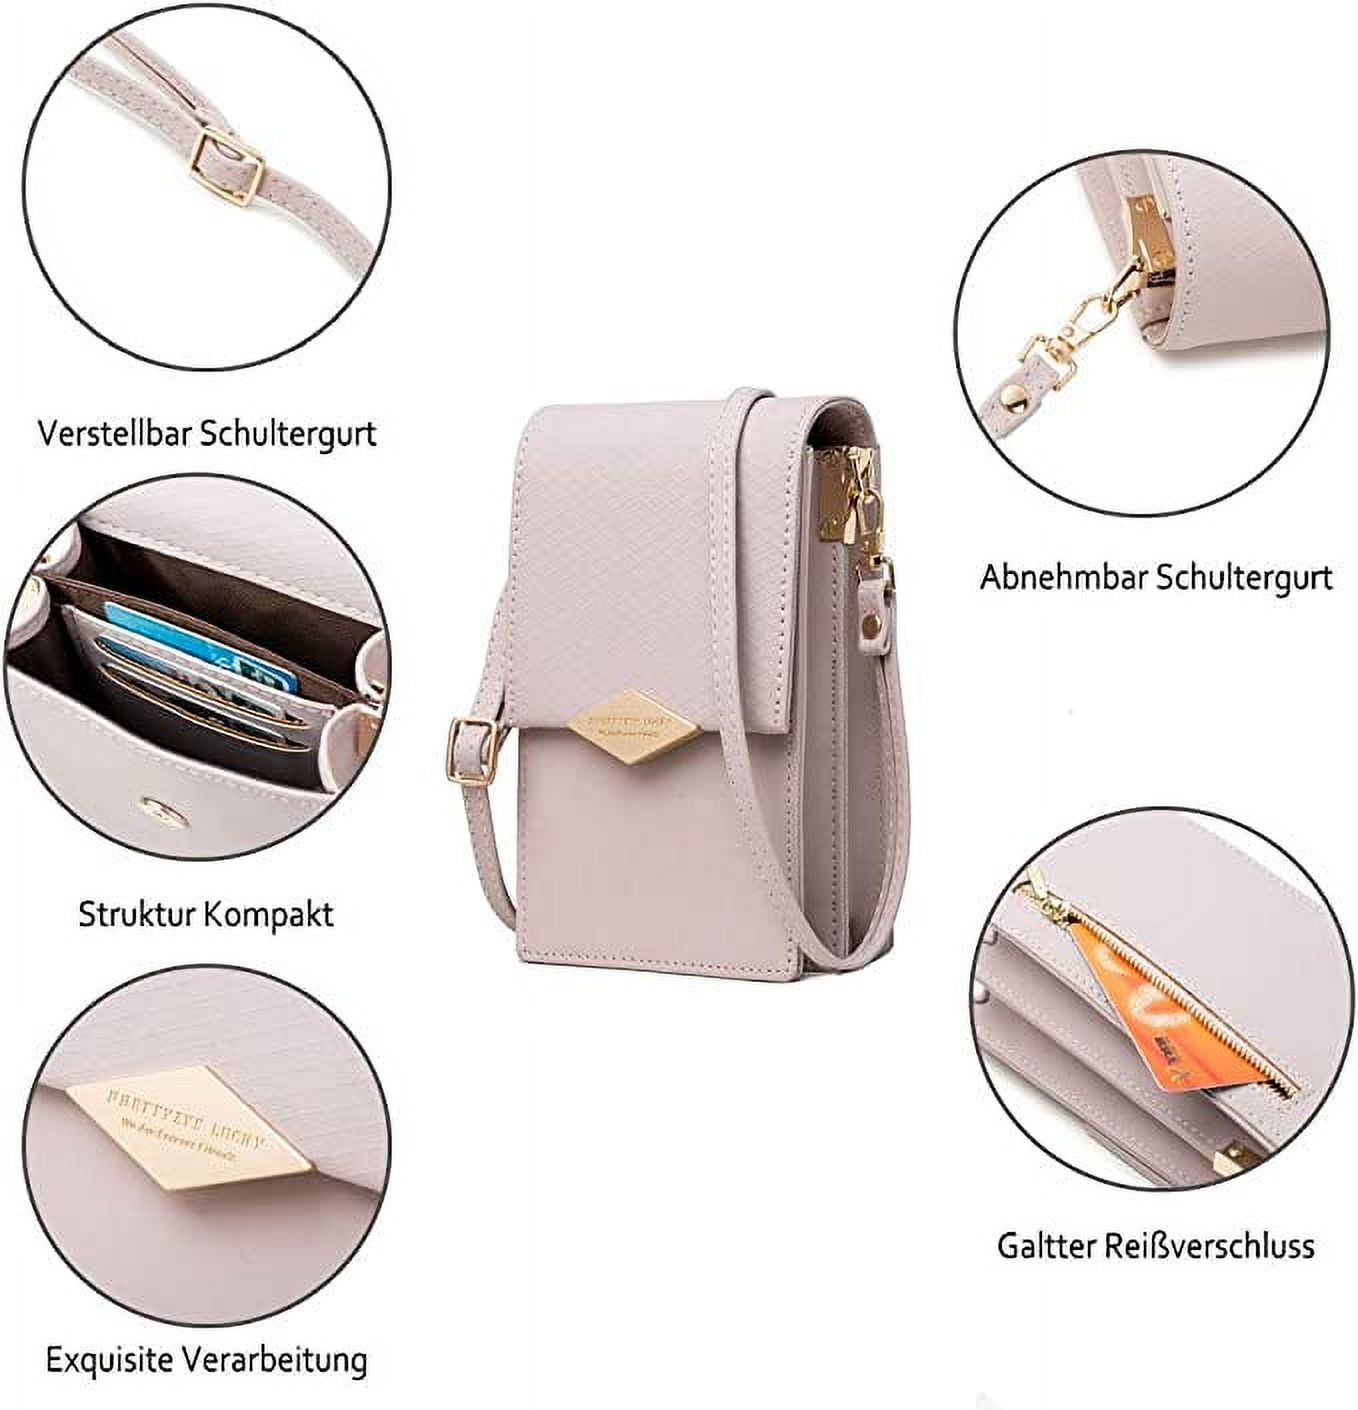 Cell Phone Purse, Small Crossbody Bag, Smartphone Wallet Card Pocket Phone  Bag with Removable Shoulder Strap, Mini Women Handbag Fit for iPhone